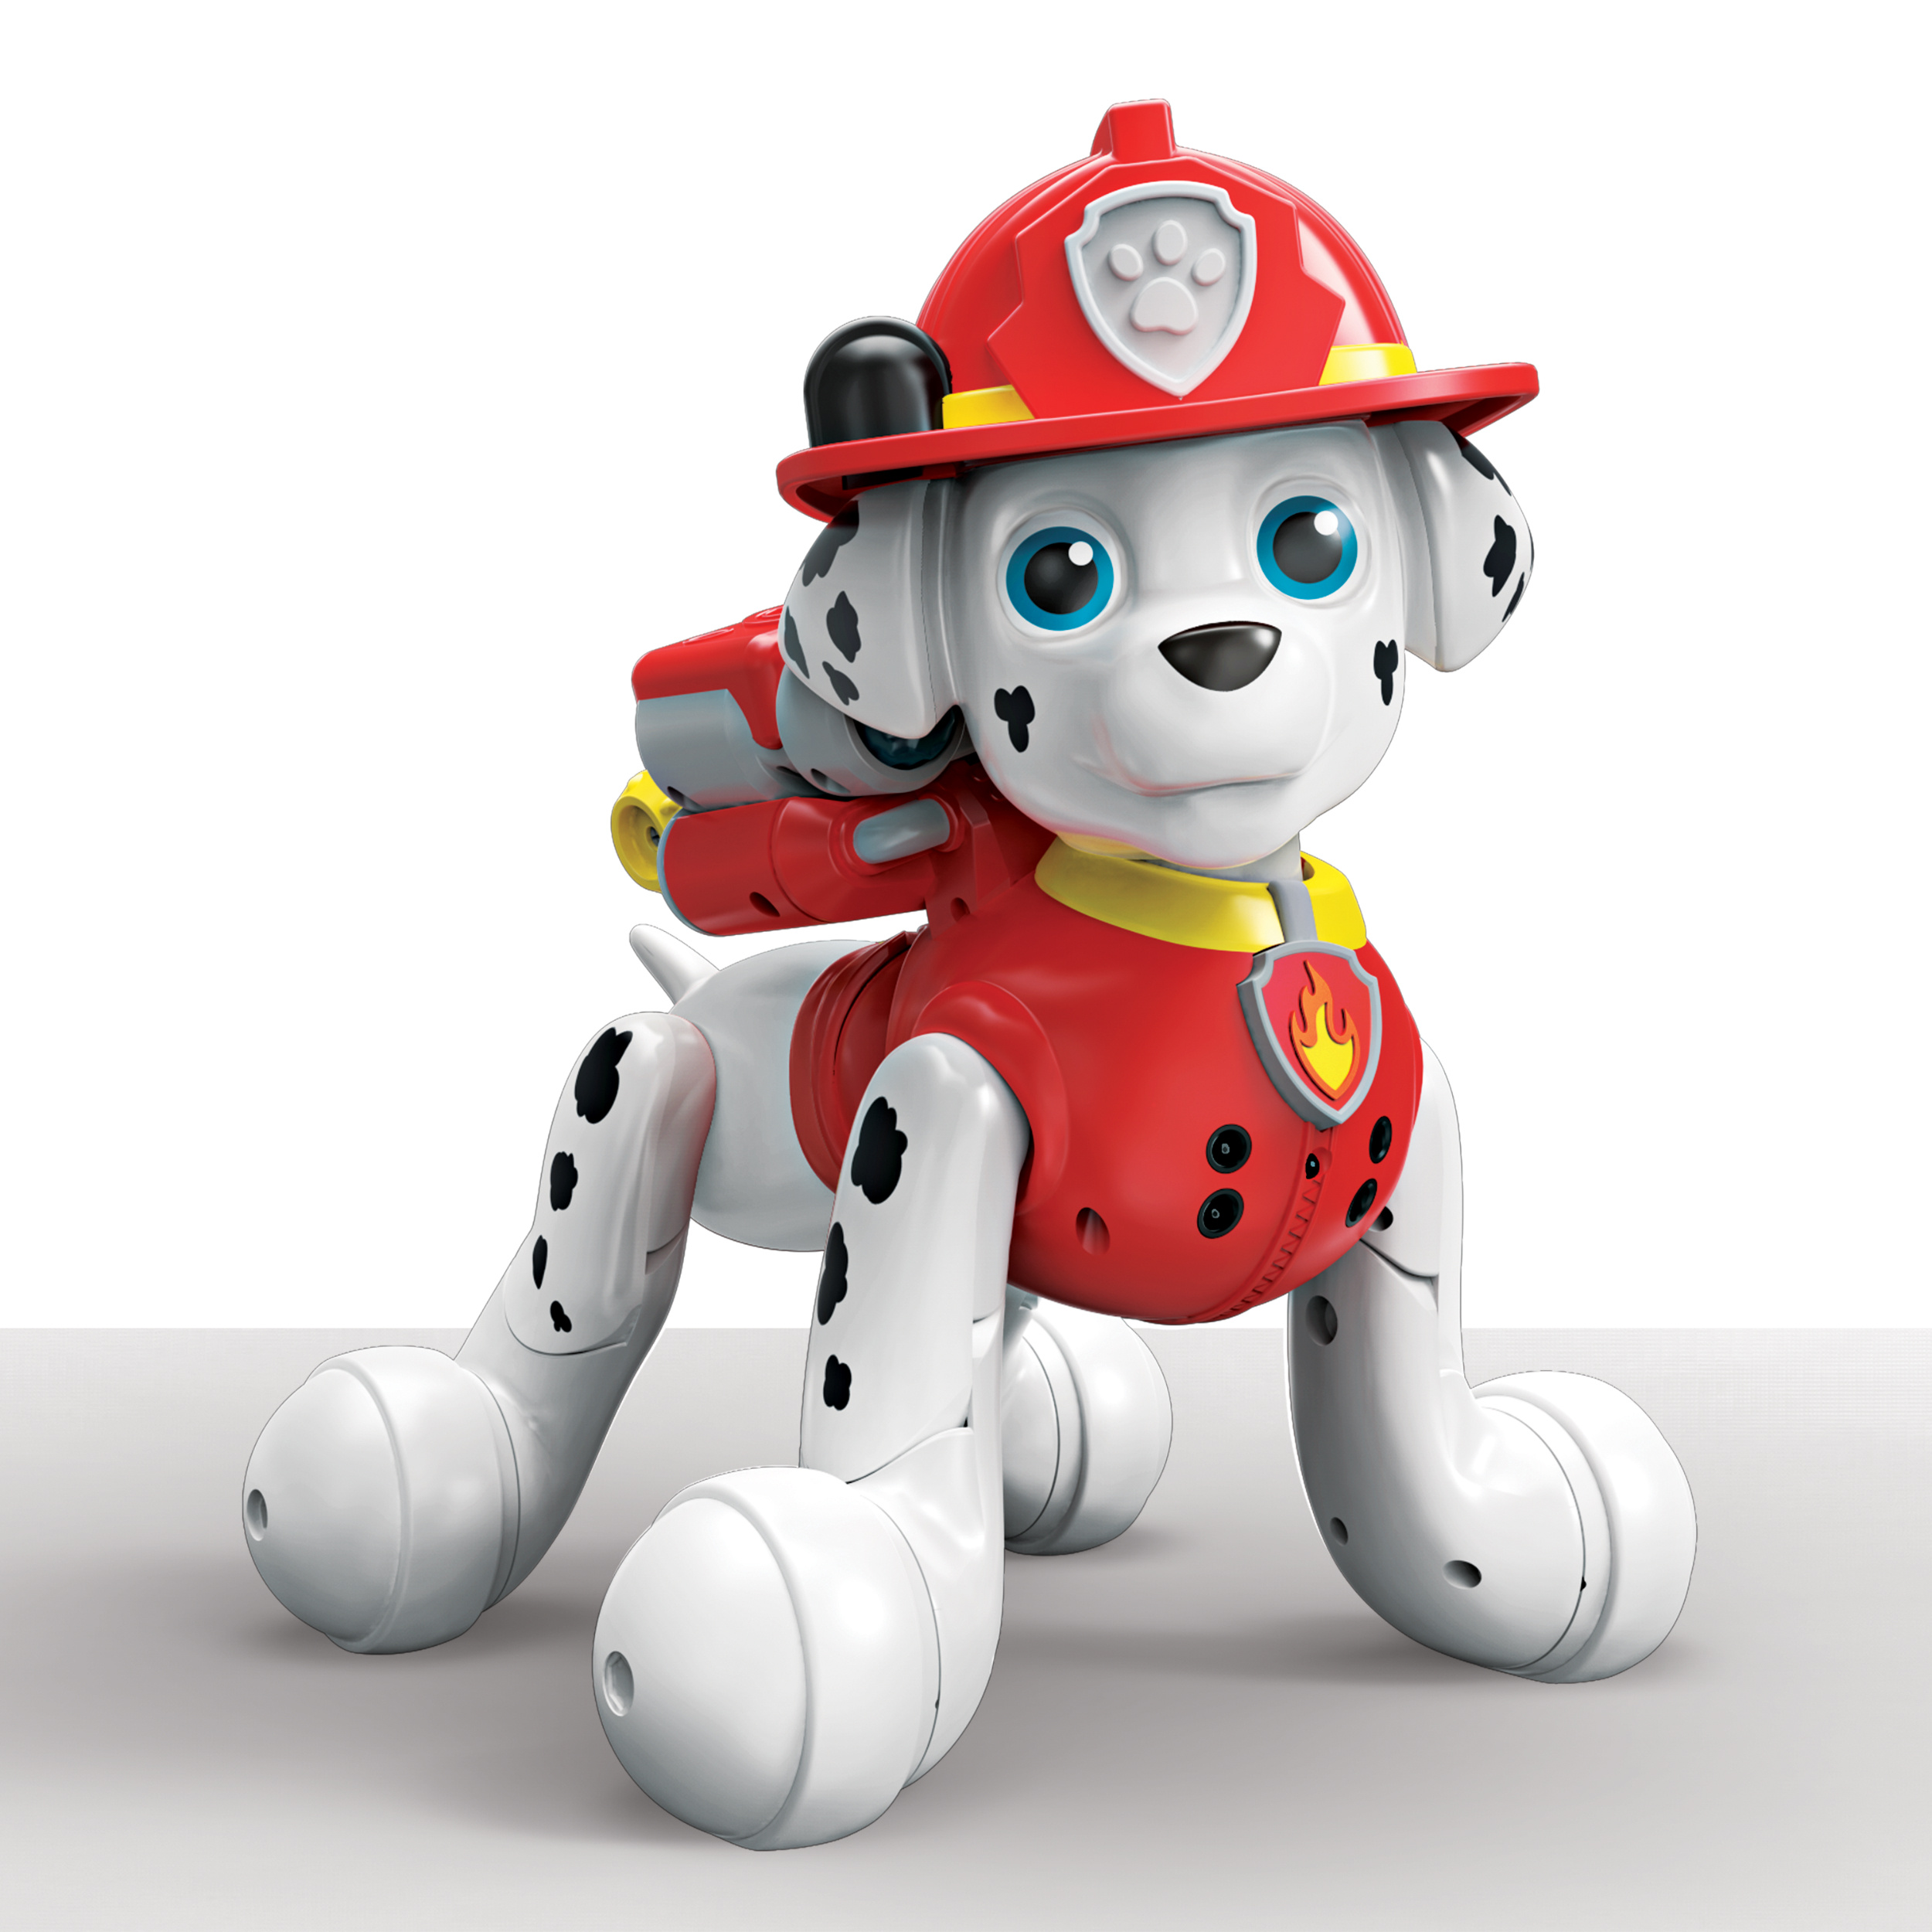 Paw Patrol, Zoomer Marshall, Interactive Pup with Missions, Sounds and Phrases, by Spin Master - image 4 of 8